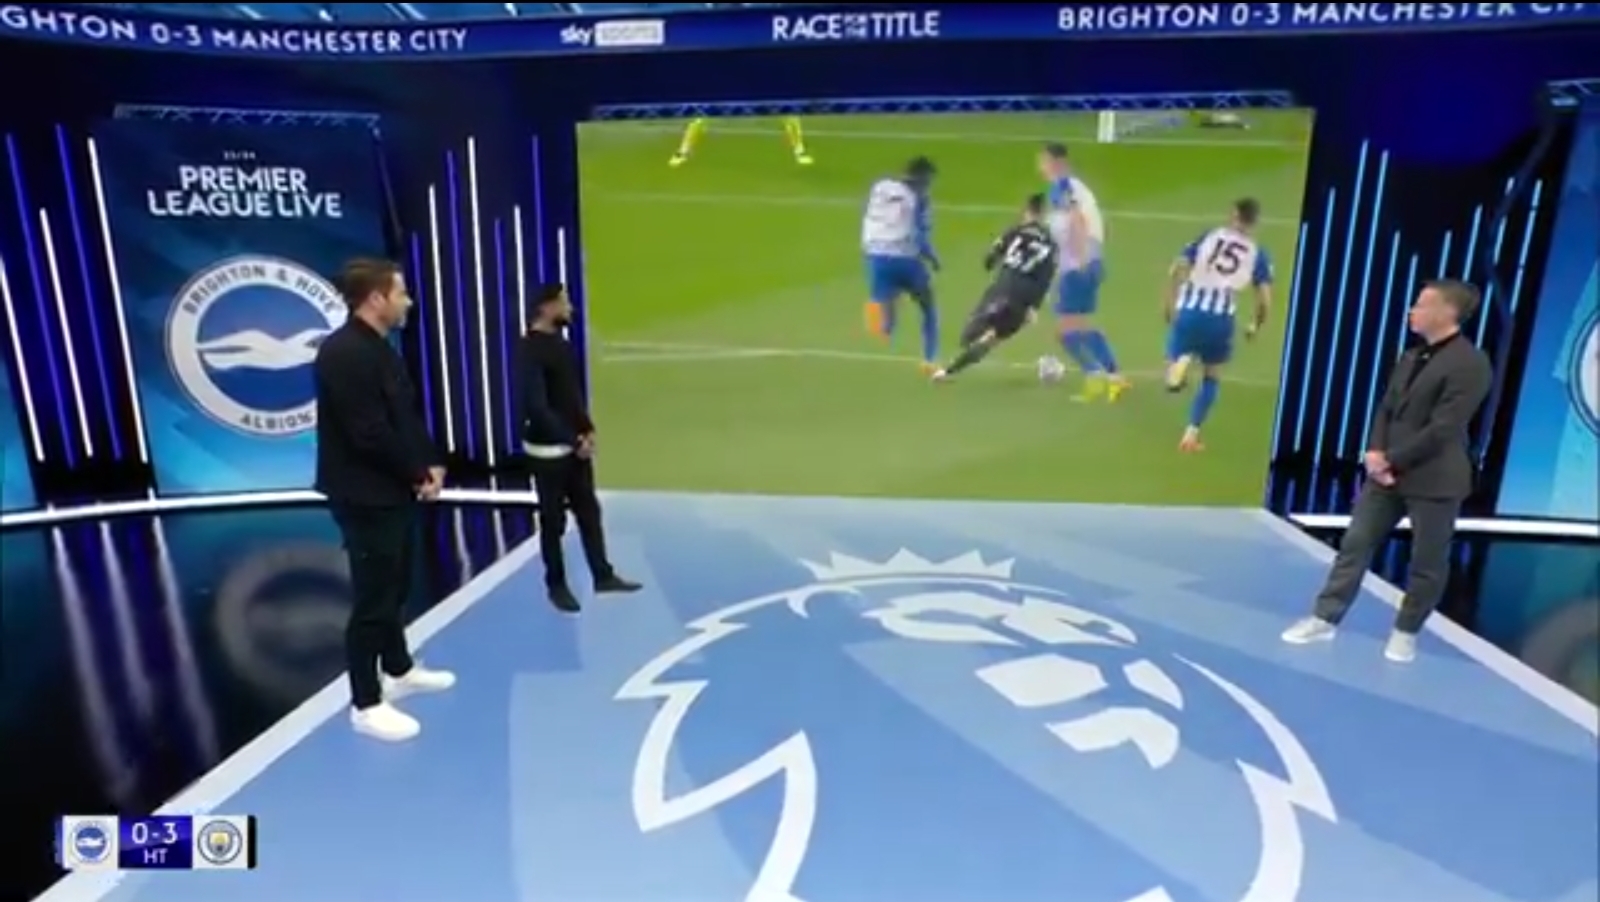 Officials in the spotlight again as pundit questions decision for Man City free-kick which Foden scores from